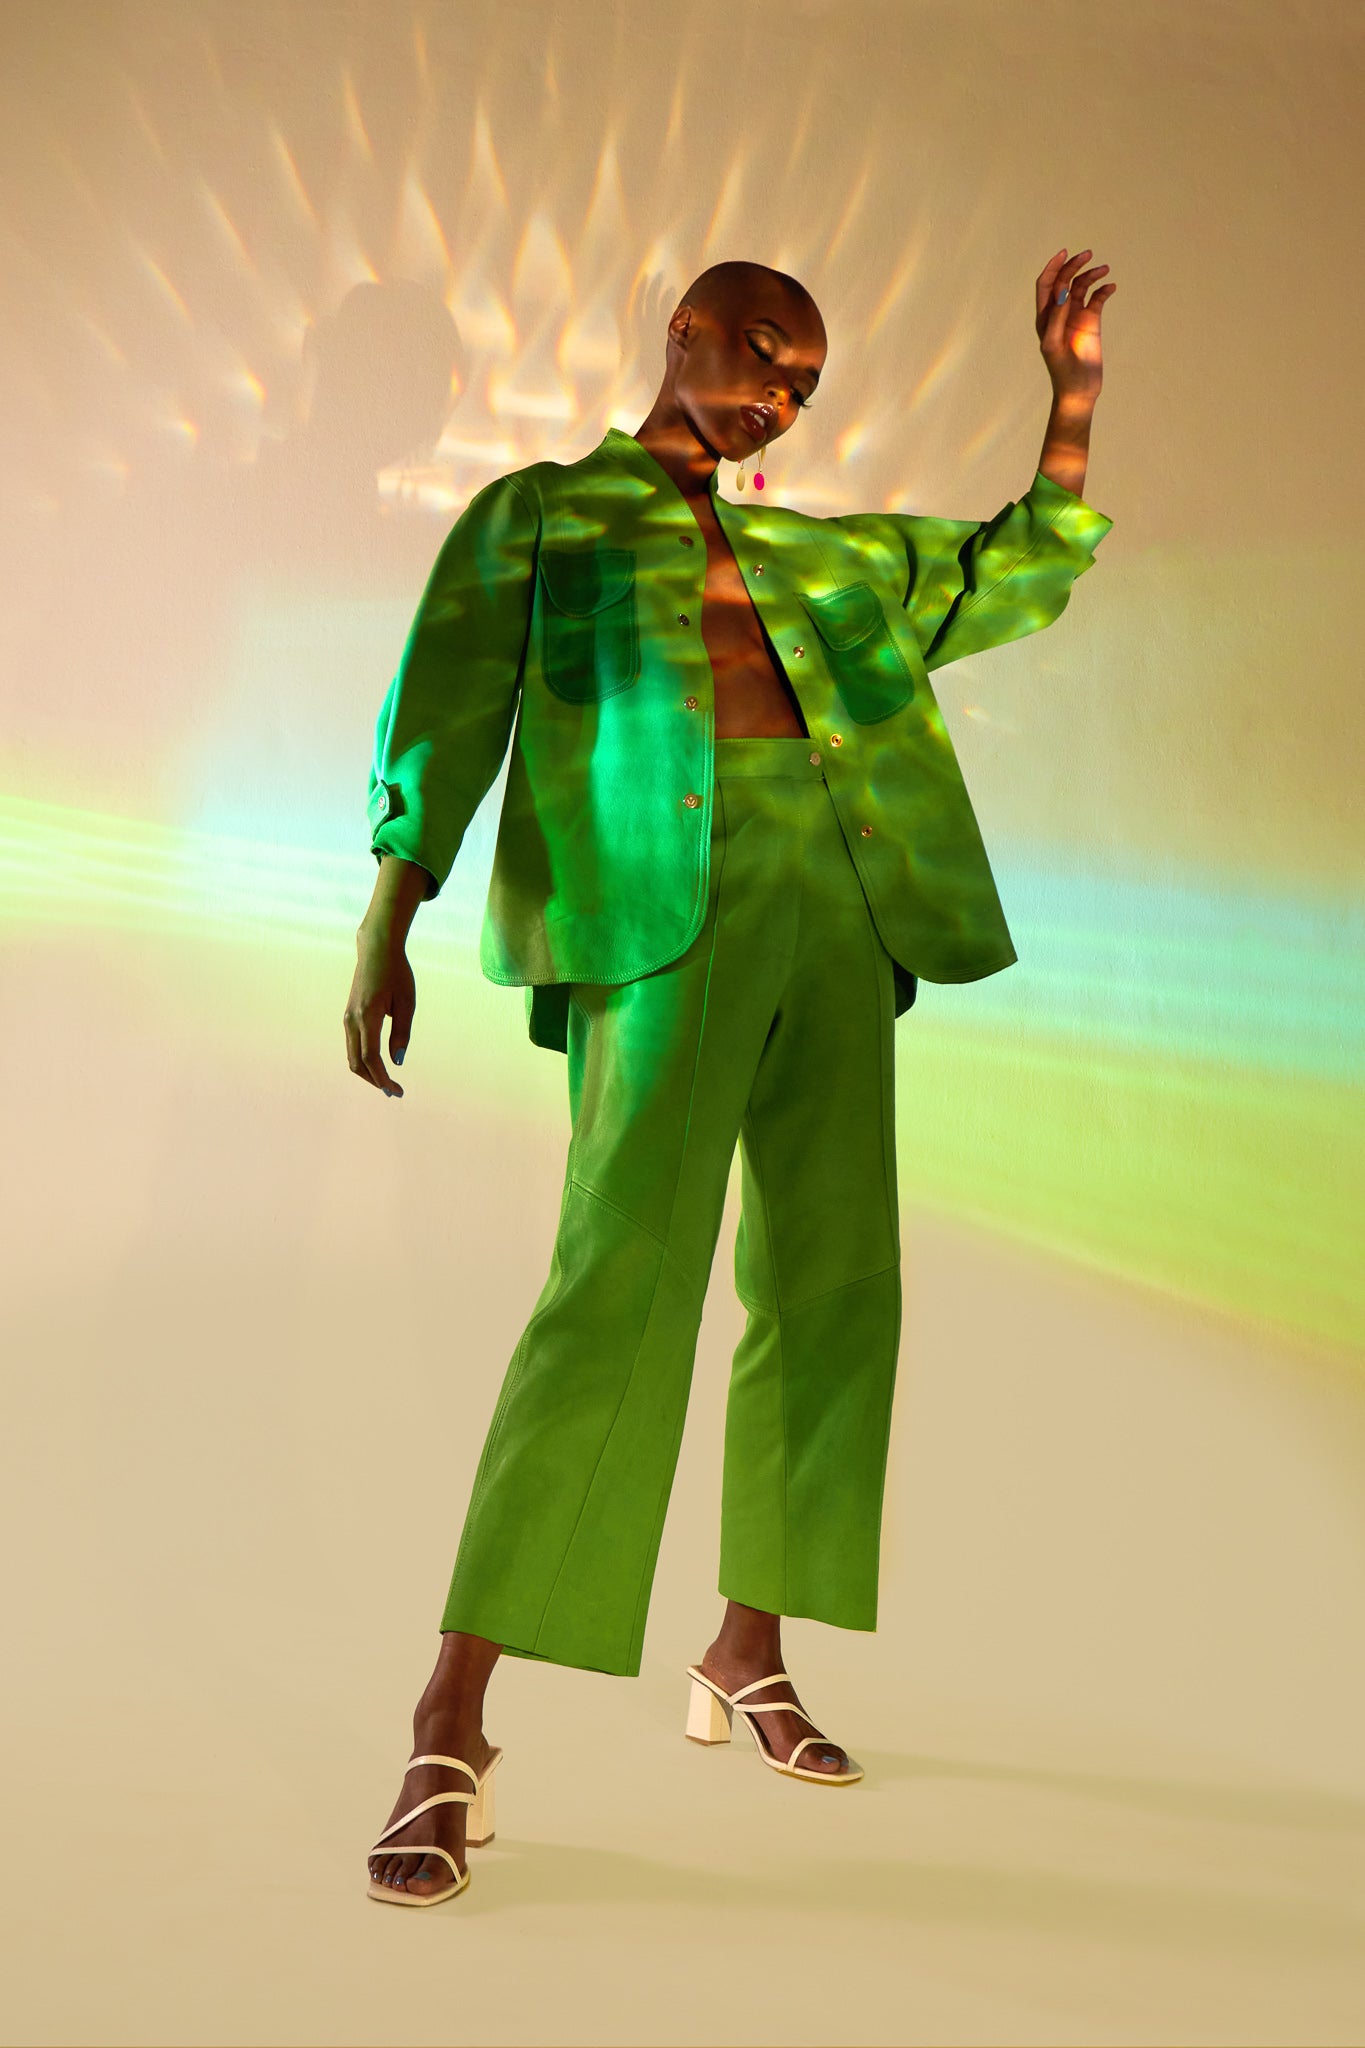 Glimmering Green Pants